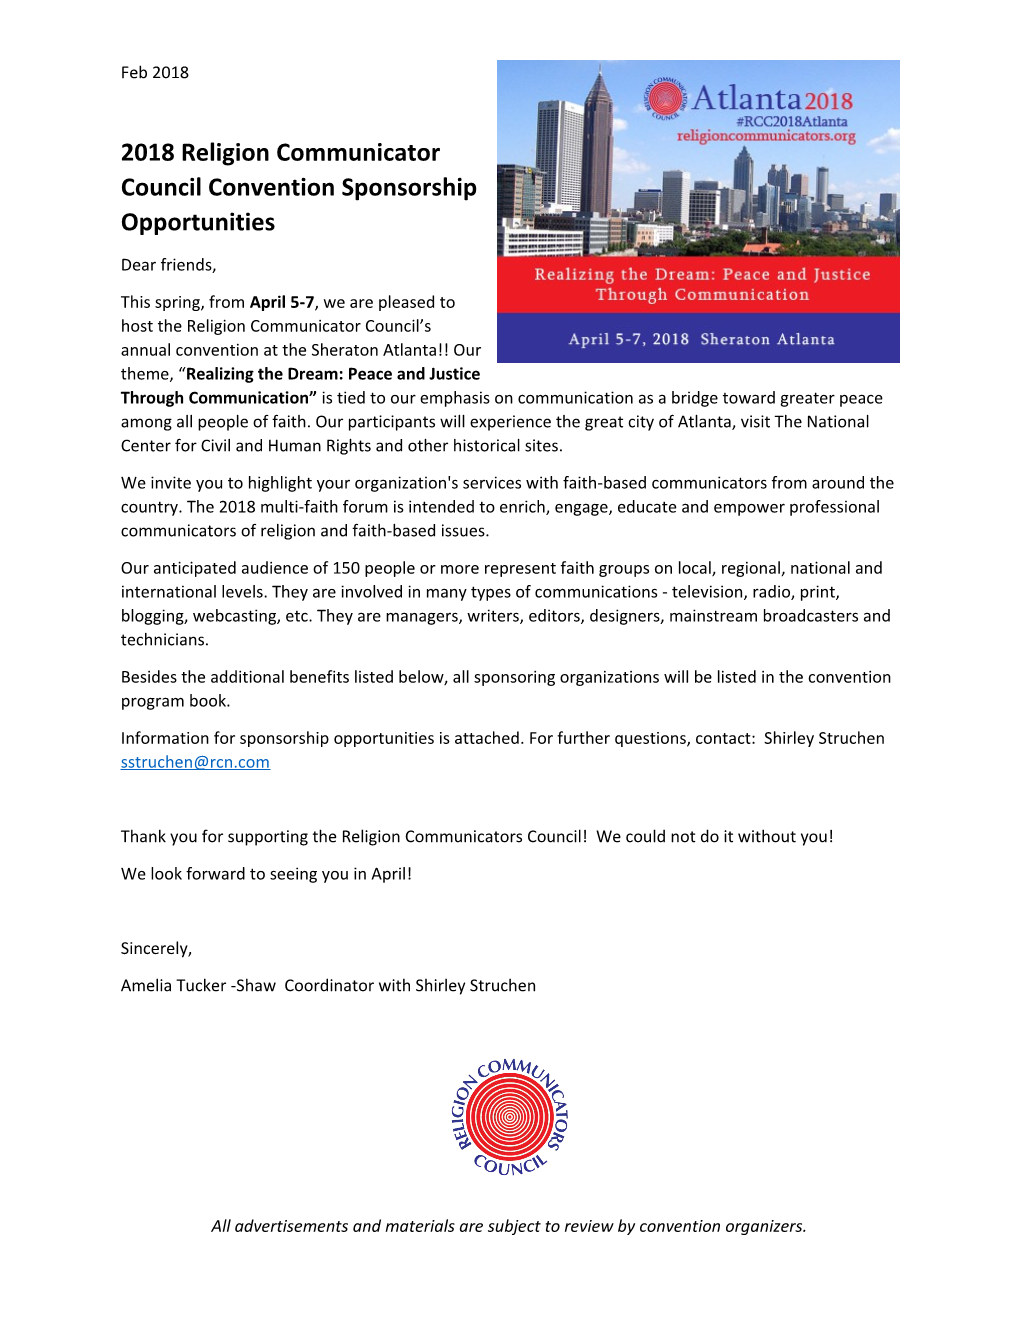 2018 Religion Communicator Council Convention Sponsorship Opportunities